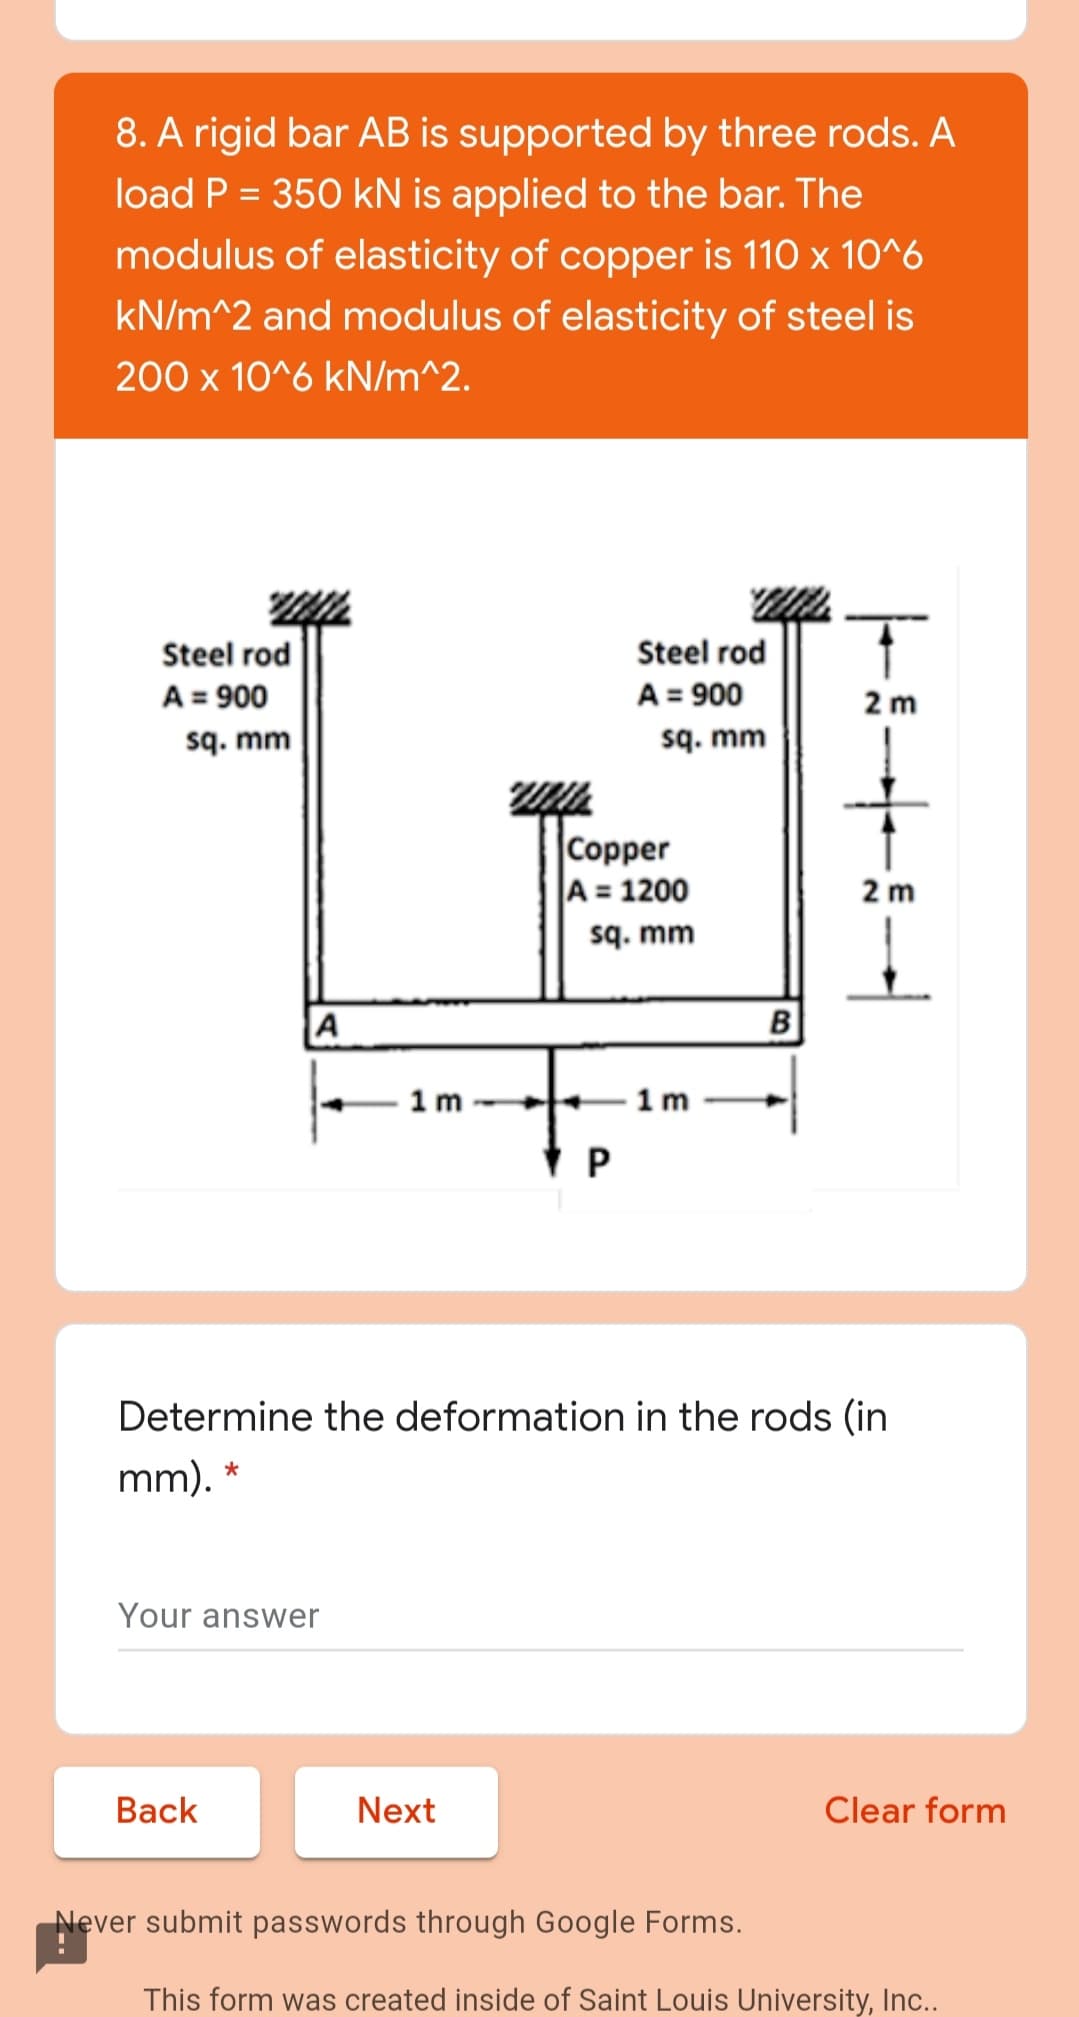 8. A rigid bar AB is supported by three rods. A
load P = 350 kN is applied to the bar. The
%3D
modulus of elasticity of copper is 110 x 10^6
kN/m^2 and modulus of elasticity of steel is
200 x 10^6 kN/m^2.
Steel rod
A = 900
sq. mm
Steel rod
A = 900
sq. mm
2 m
|Copper
A = 1200
sq. mm
2 m
A
B
1 m -
1 m
Determine the deformation in the rods (in
mm). *
Your answer
Вack
Next
Clear form
Never submit passwords through Google Forms.
This form was created inside of Saint Louis University, Inc..
